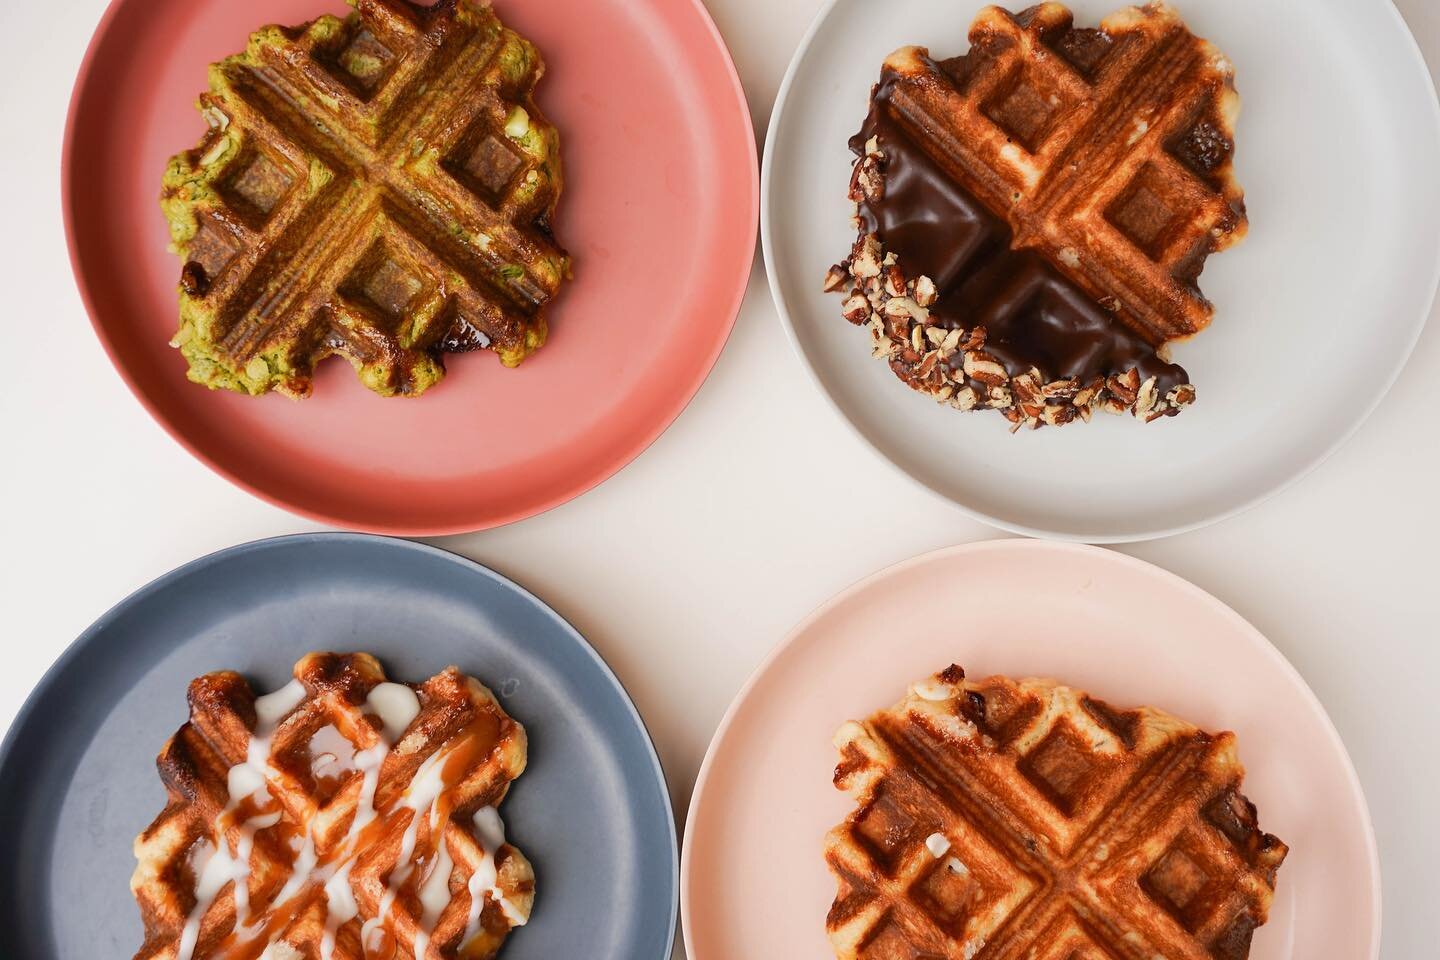 Did someone say waffles!? 

Yes. We did. We are opened on Sundays from 9-3 and are whipping these waffles up from scratch as a Sunday special. They are liege waffles and we have four different options: 

- Plain
- Chocolate pecan
- Caramel white choc